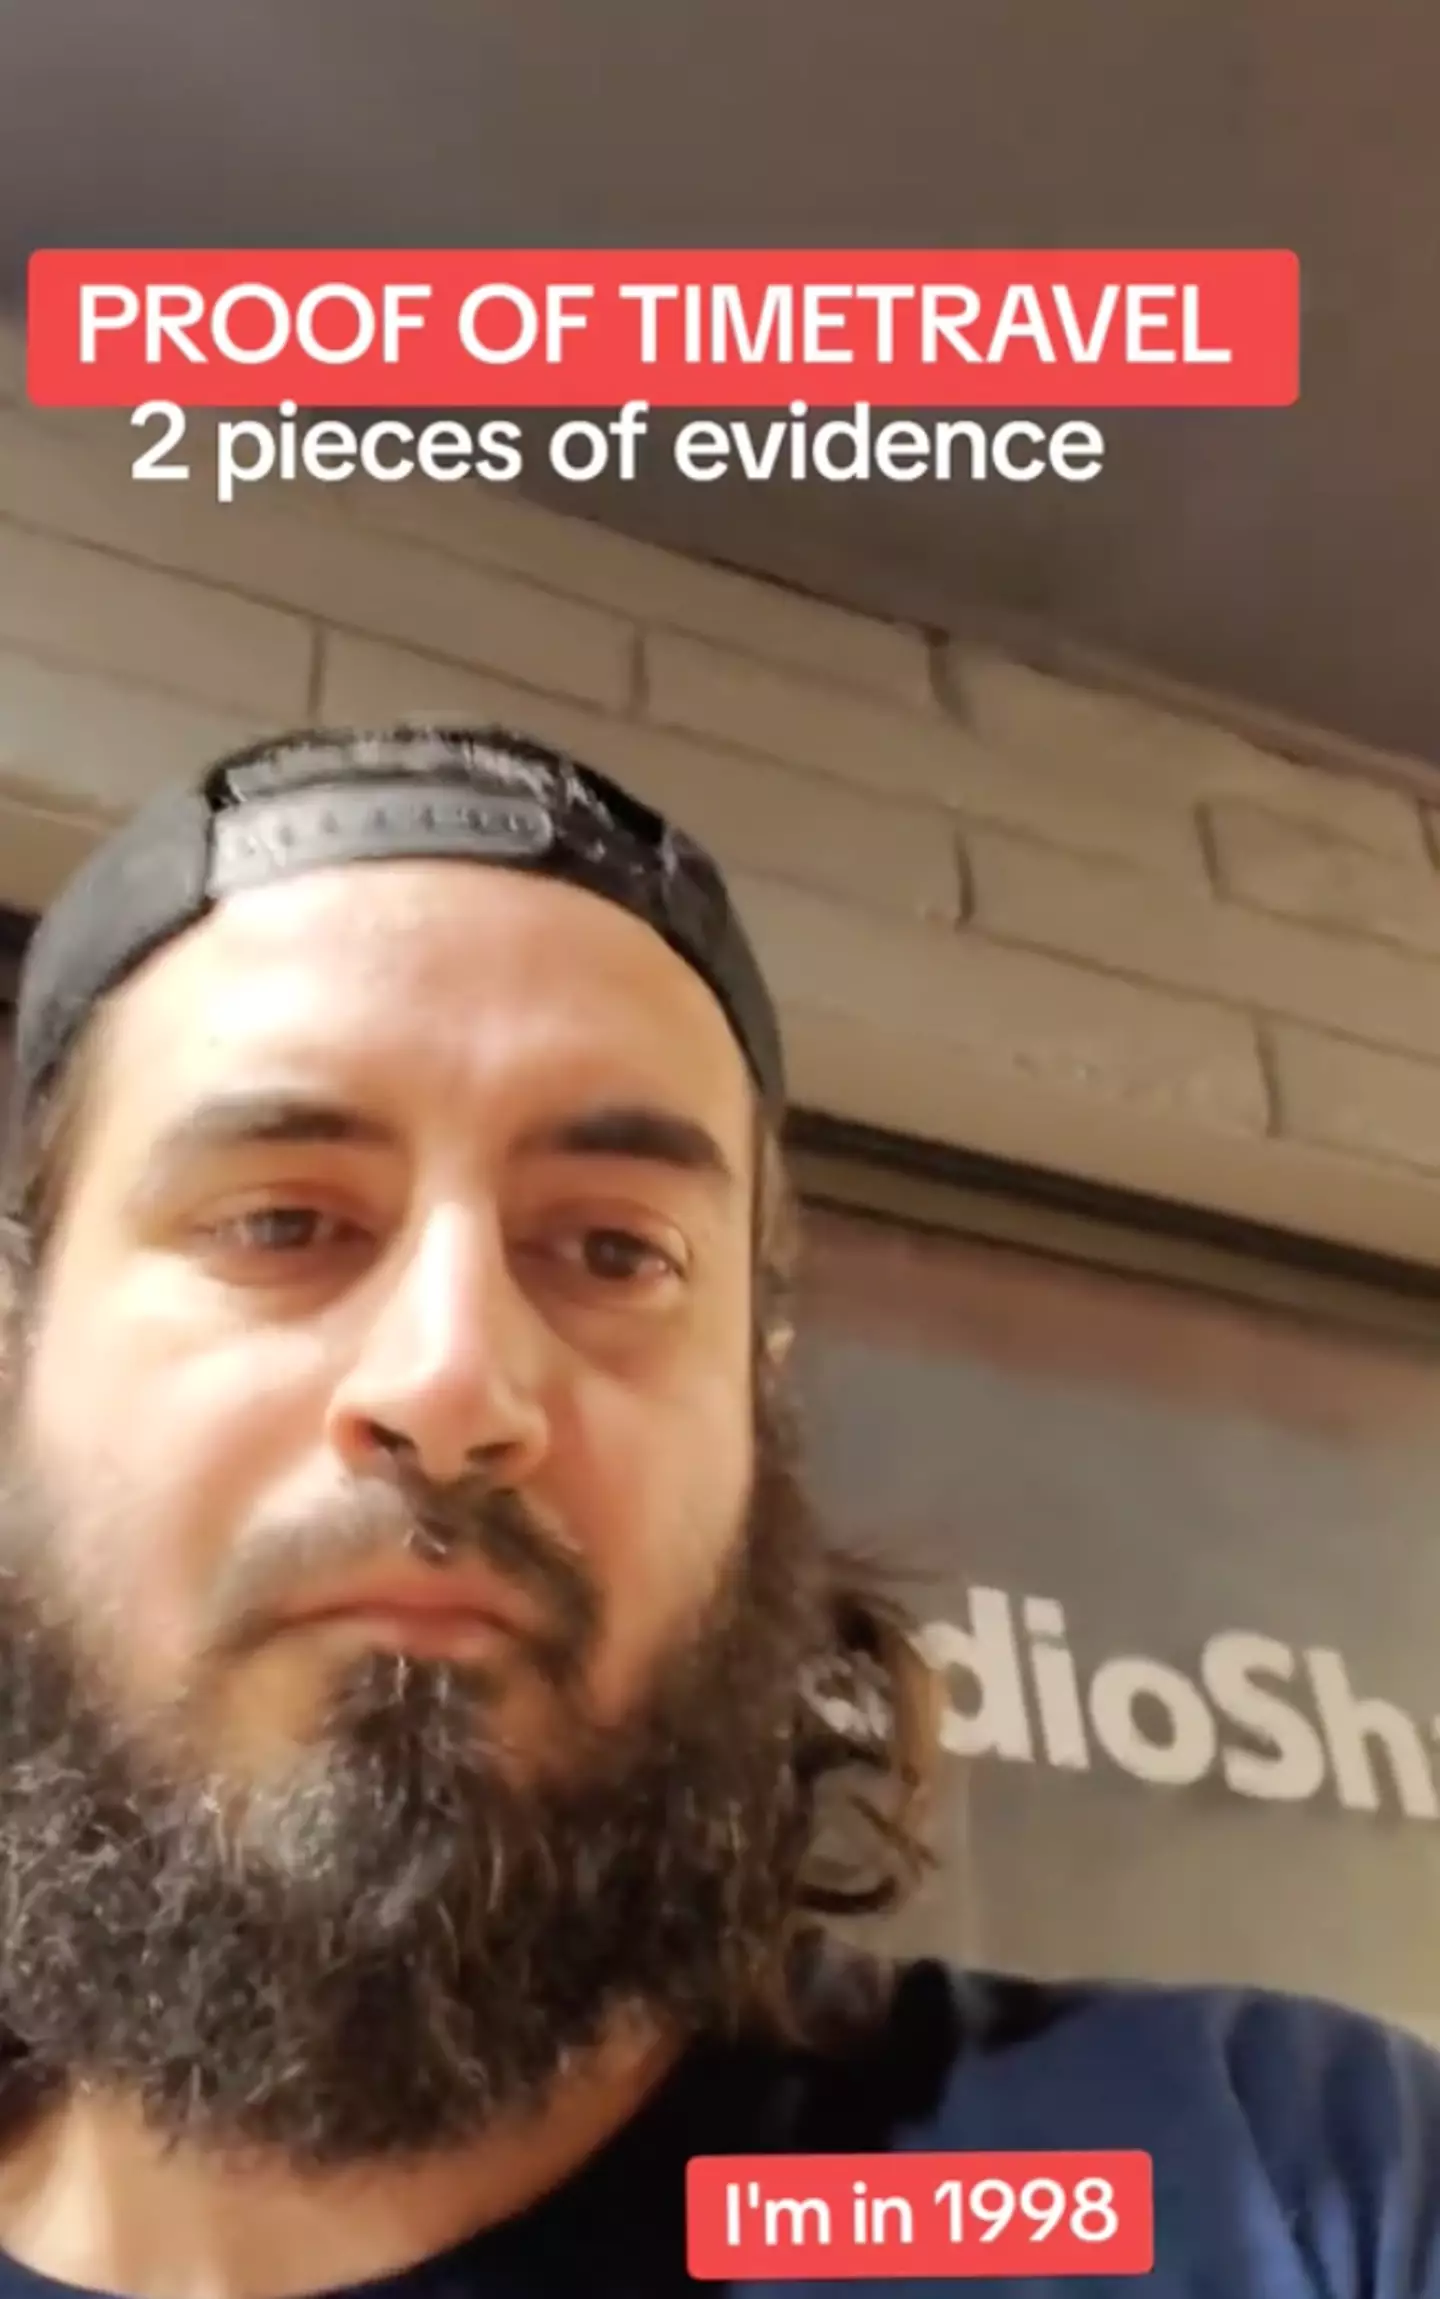 The man shared two pieces of 'evidence'.